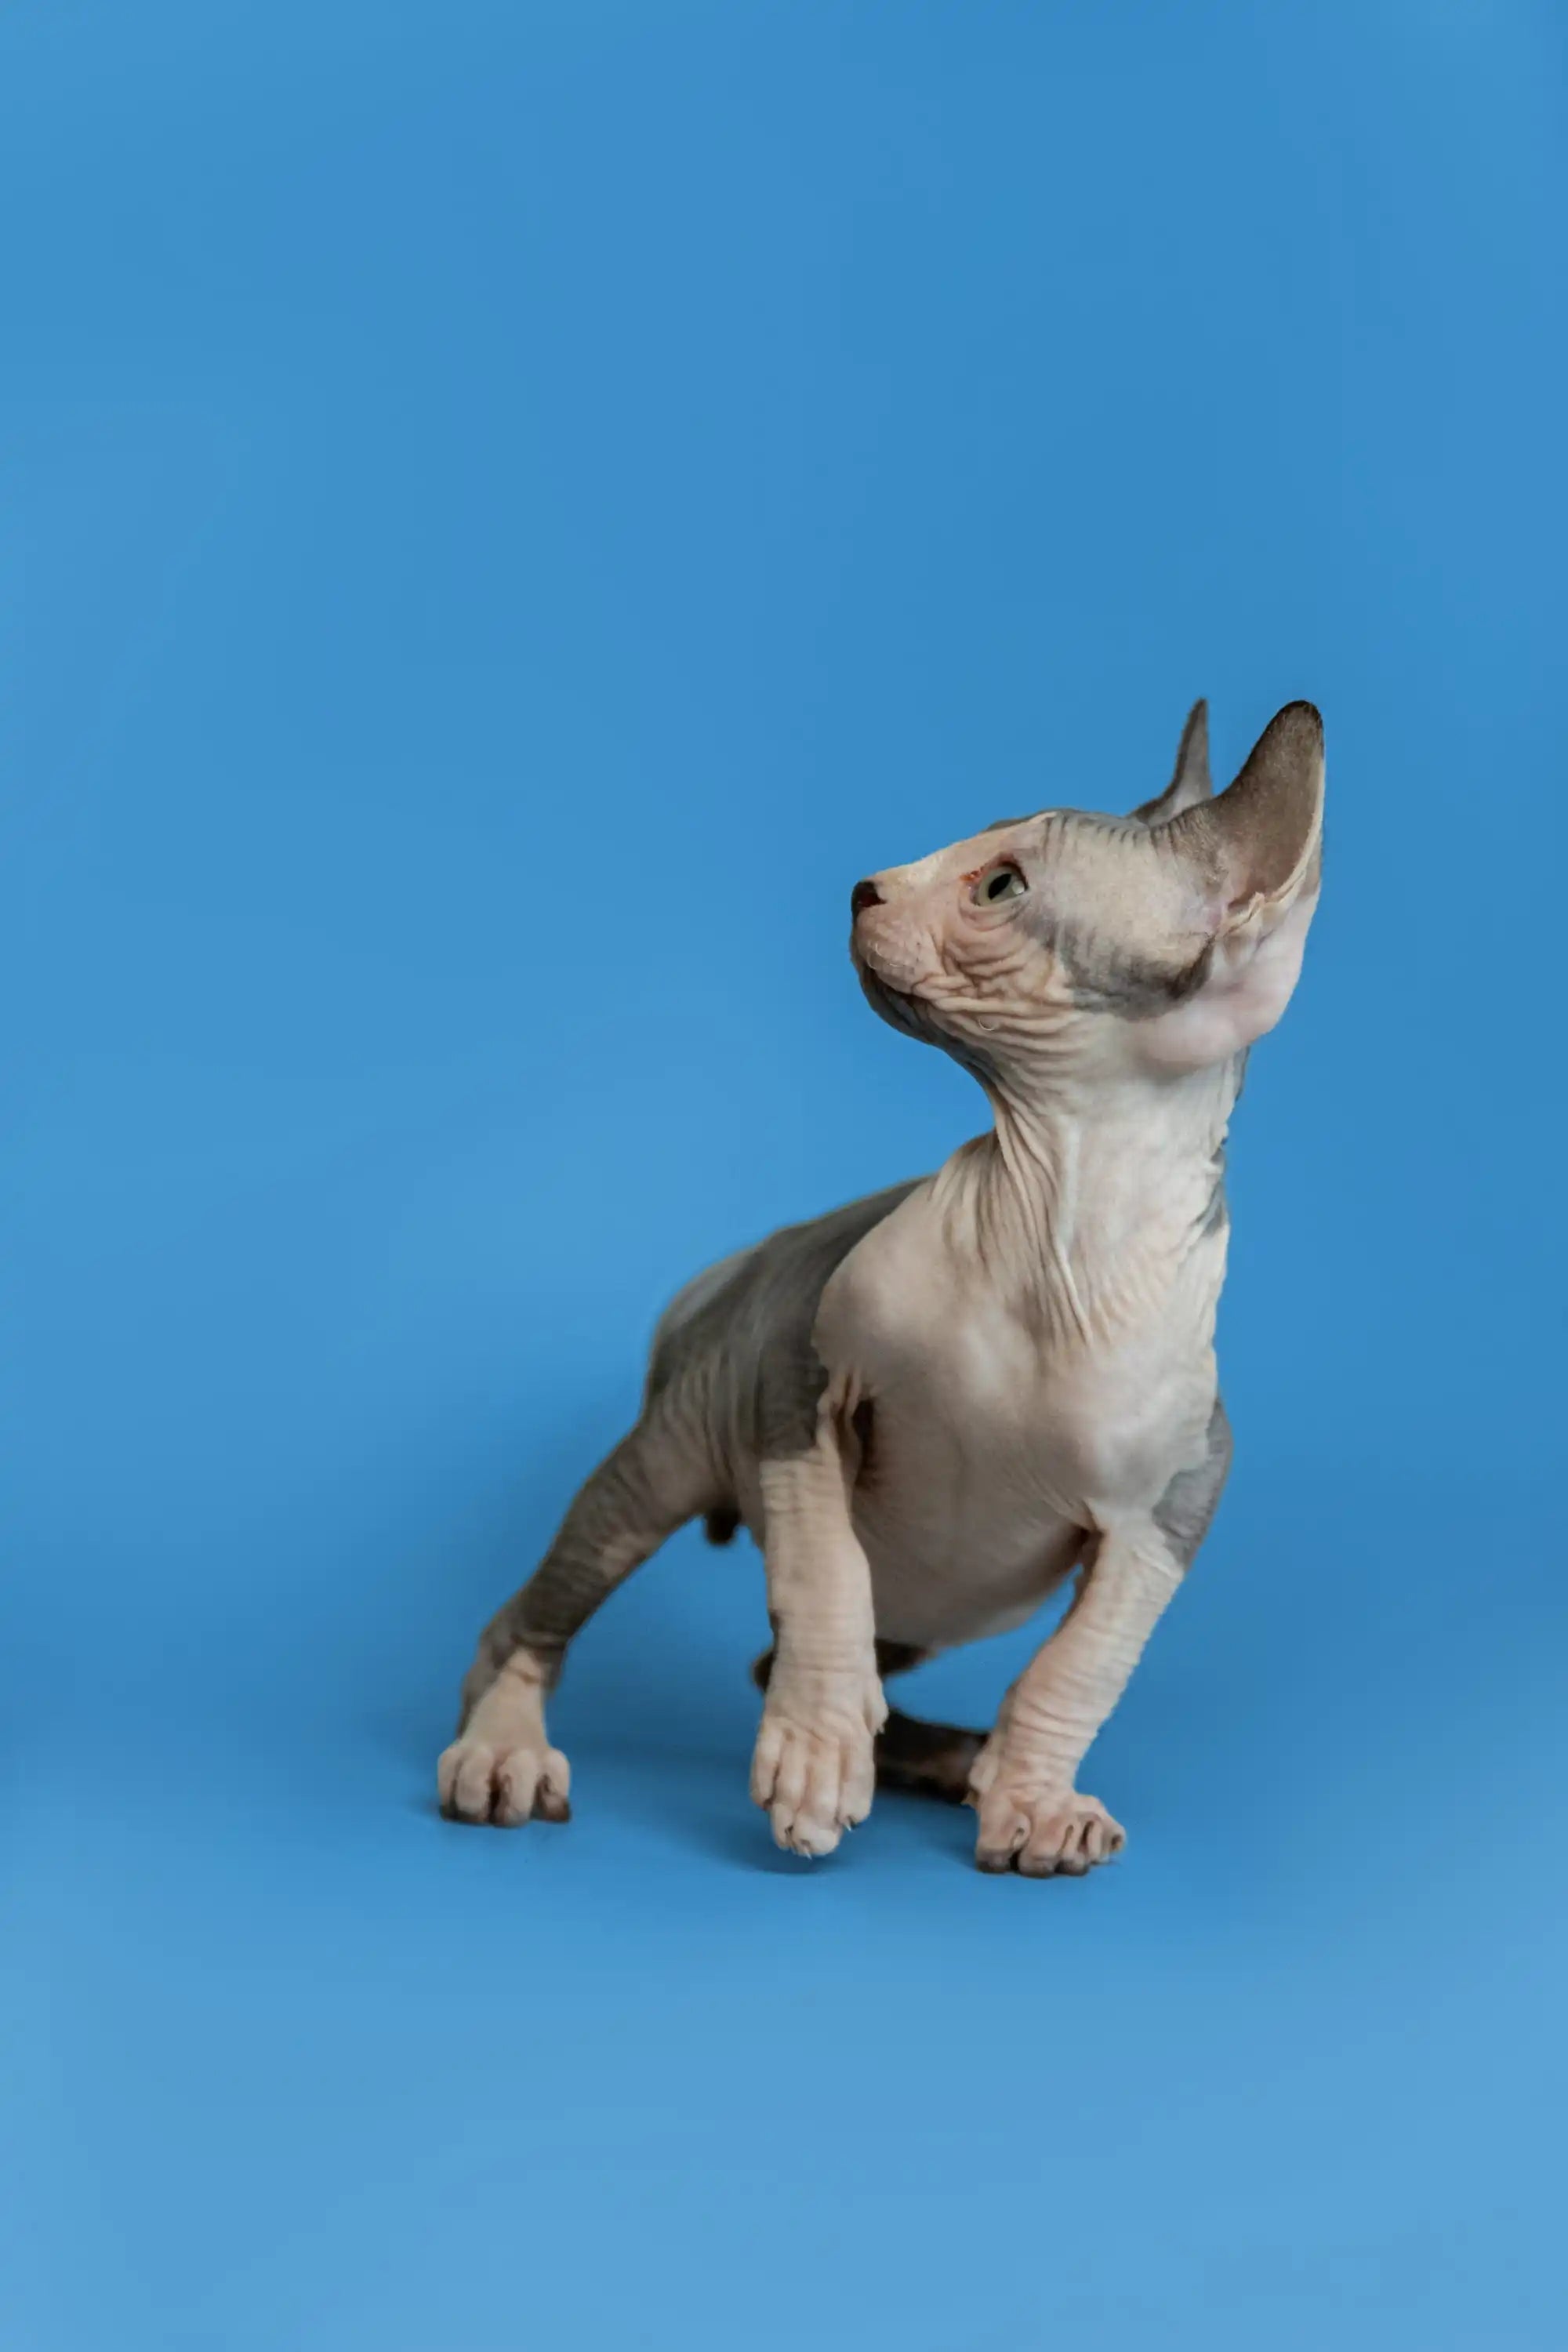 Sphynx Cats and Kittens for Sale Florian | Kitten